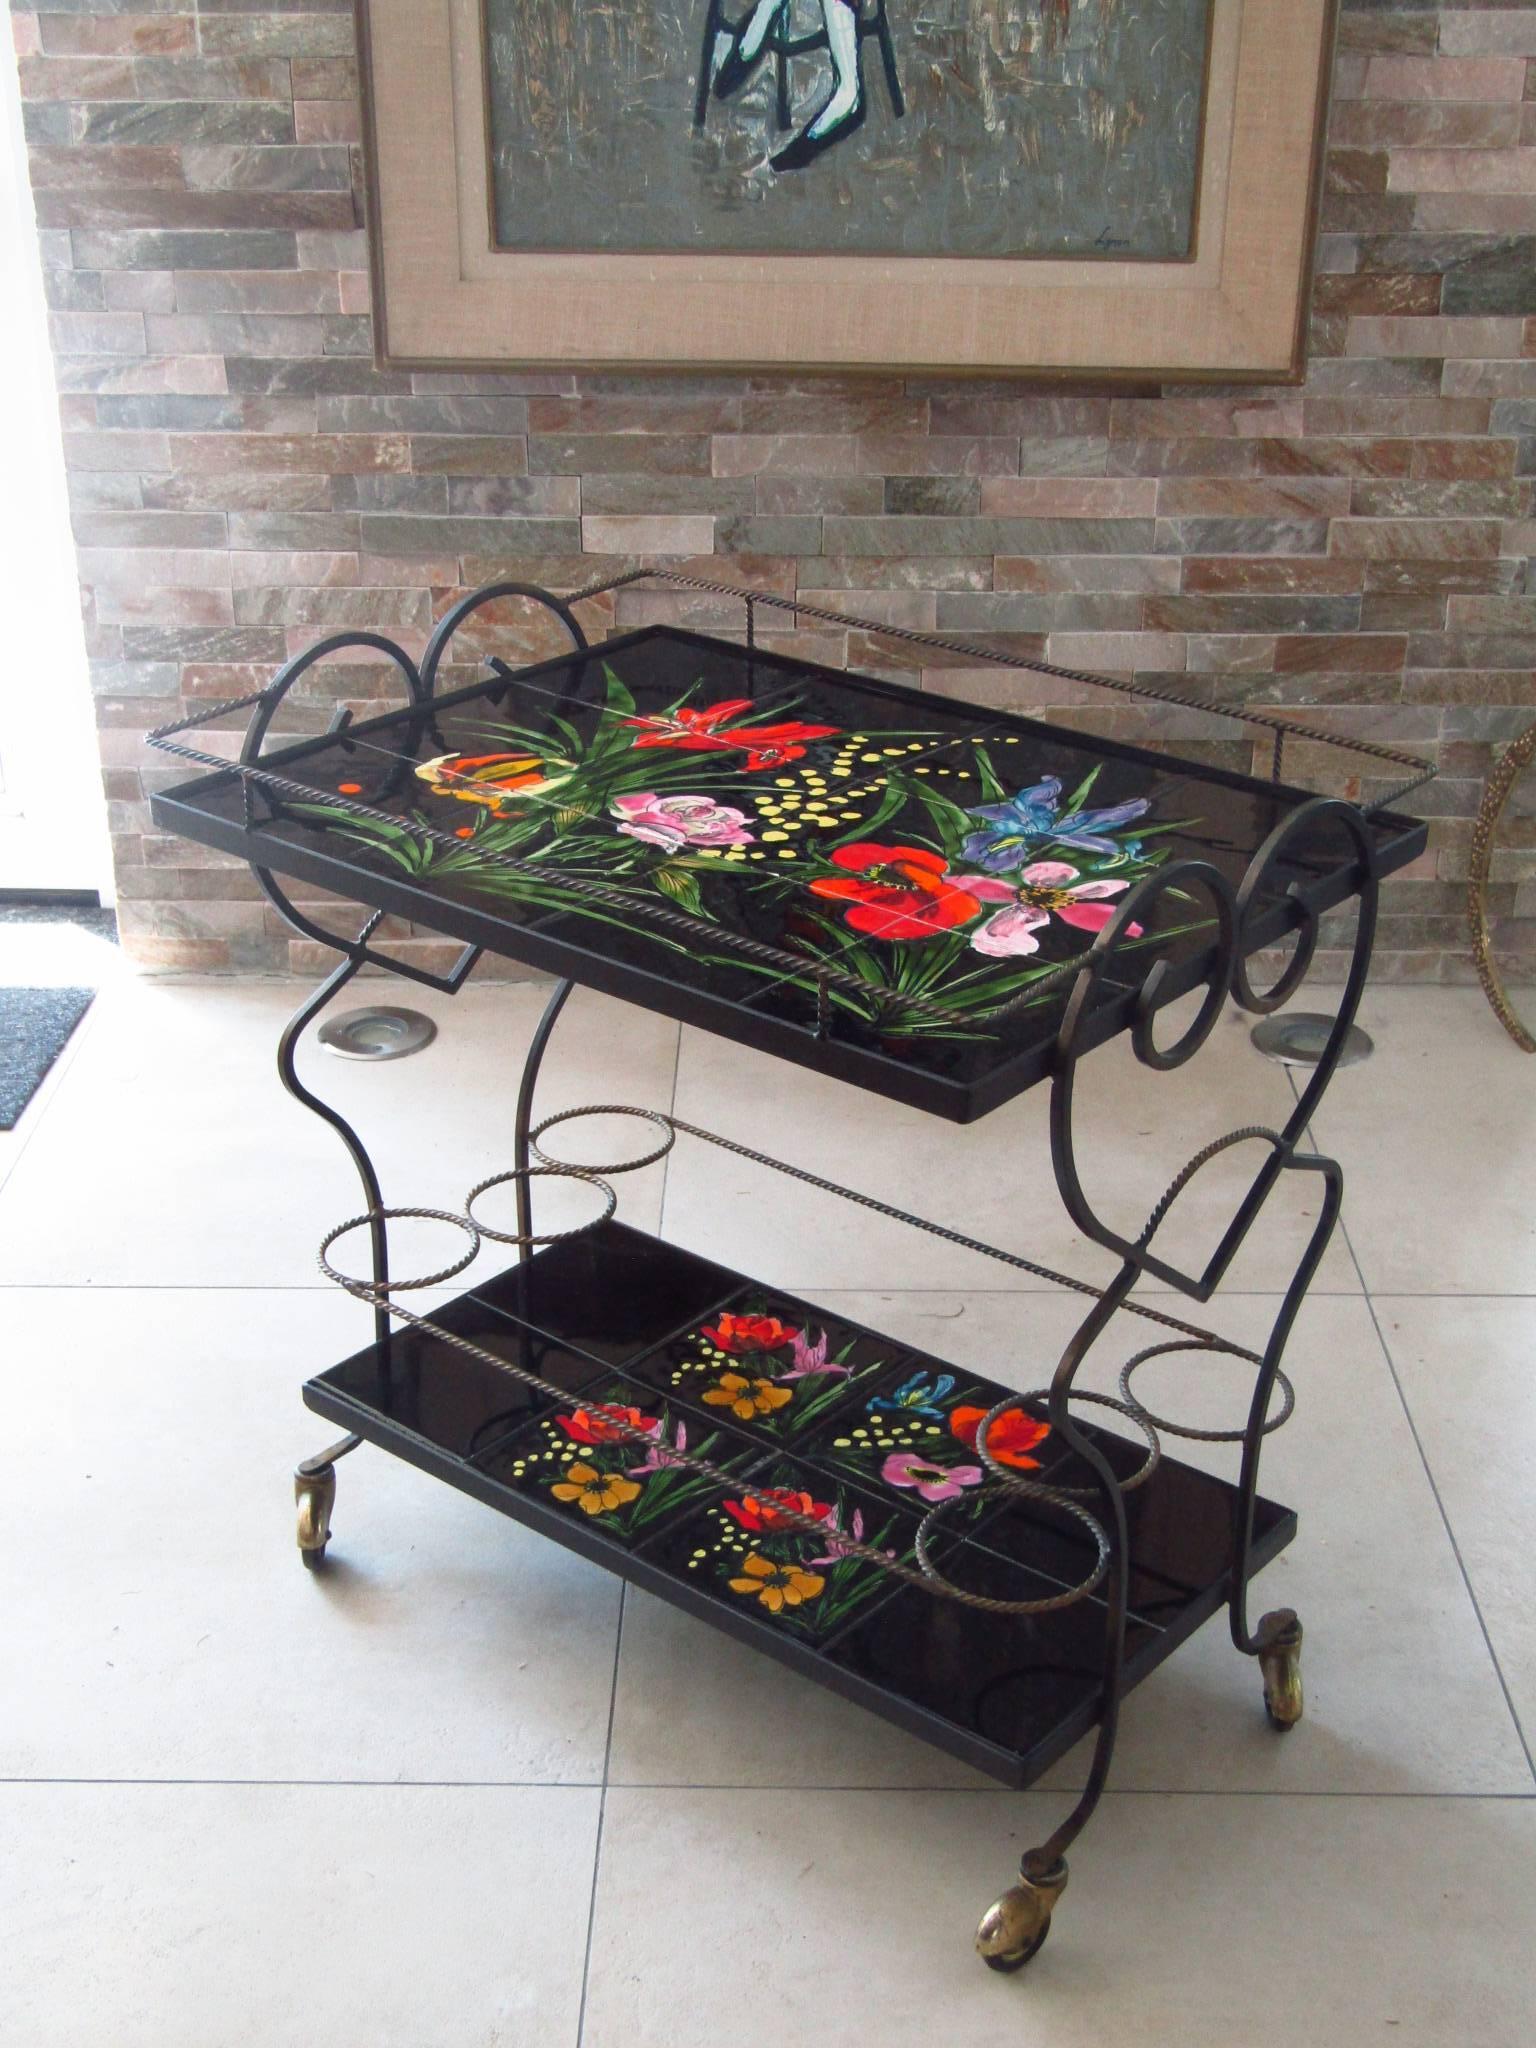 Mid-Century Modern Midcentury Bar Cart Tiles and Wrought Iron, Vallauris France, 1950s For Sale